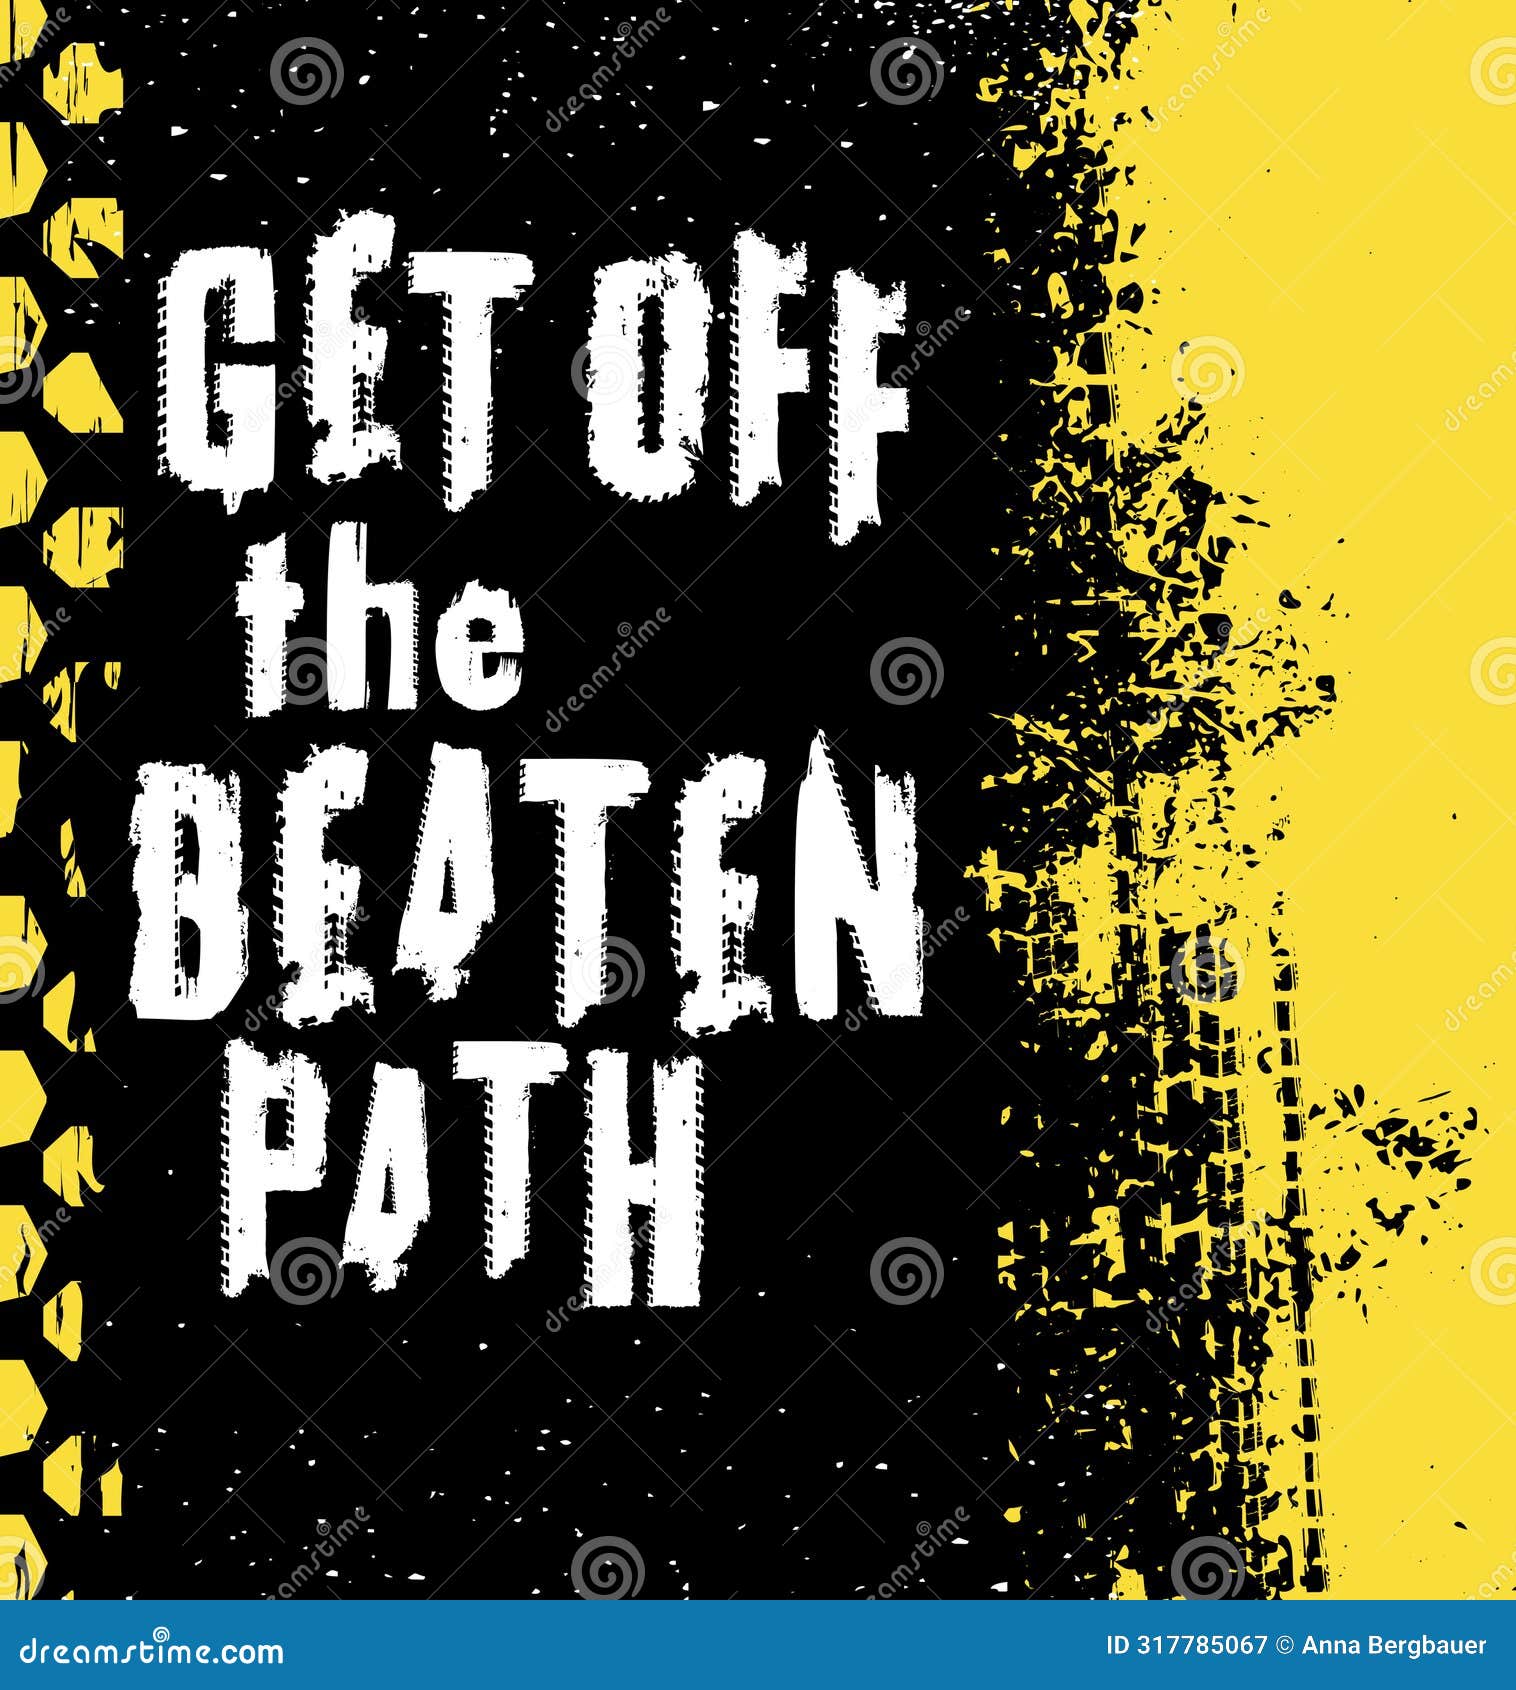 off-road hand drawn grunge lettering. off the beaten path.